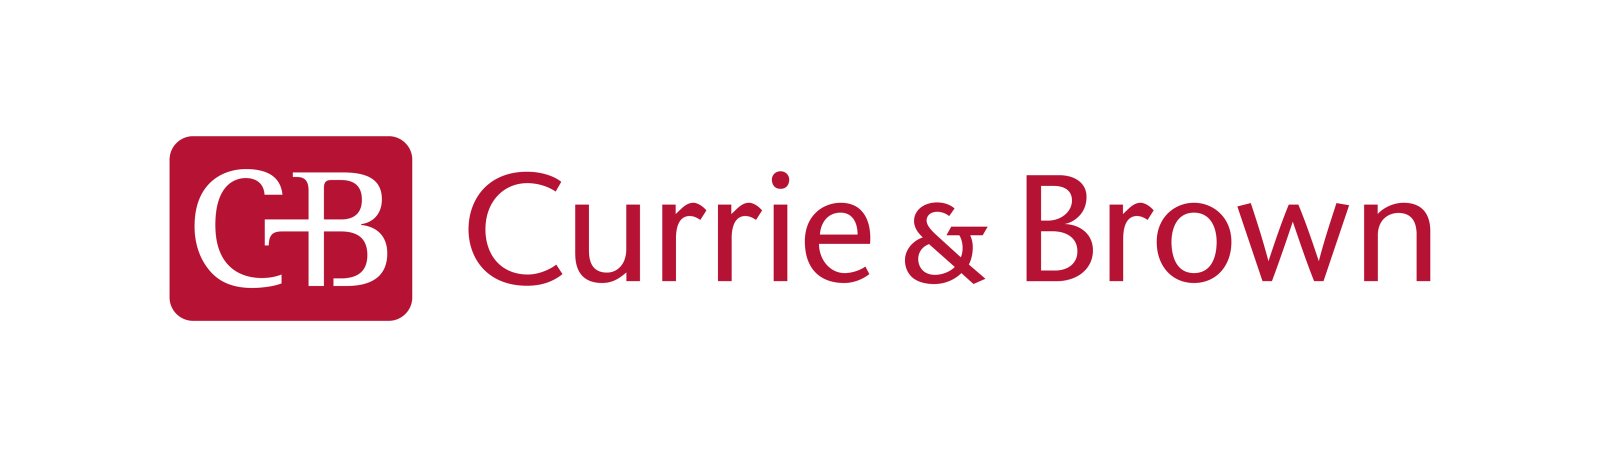 Logo Currie & Brown